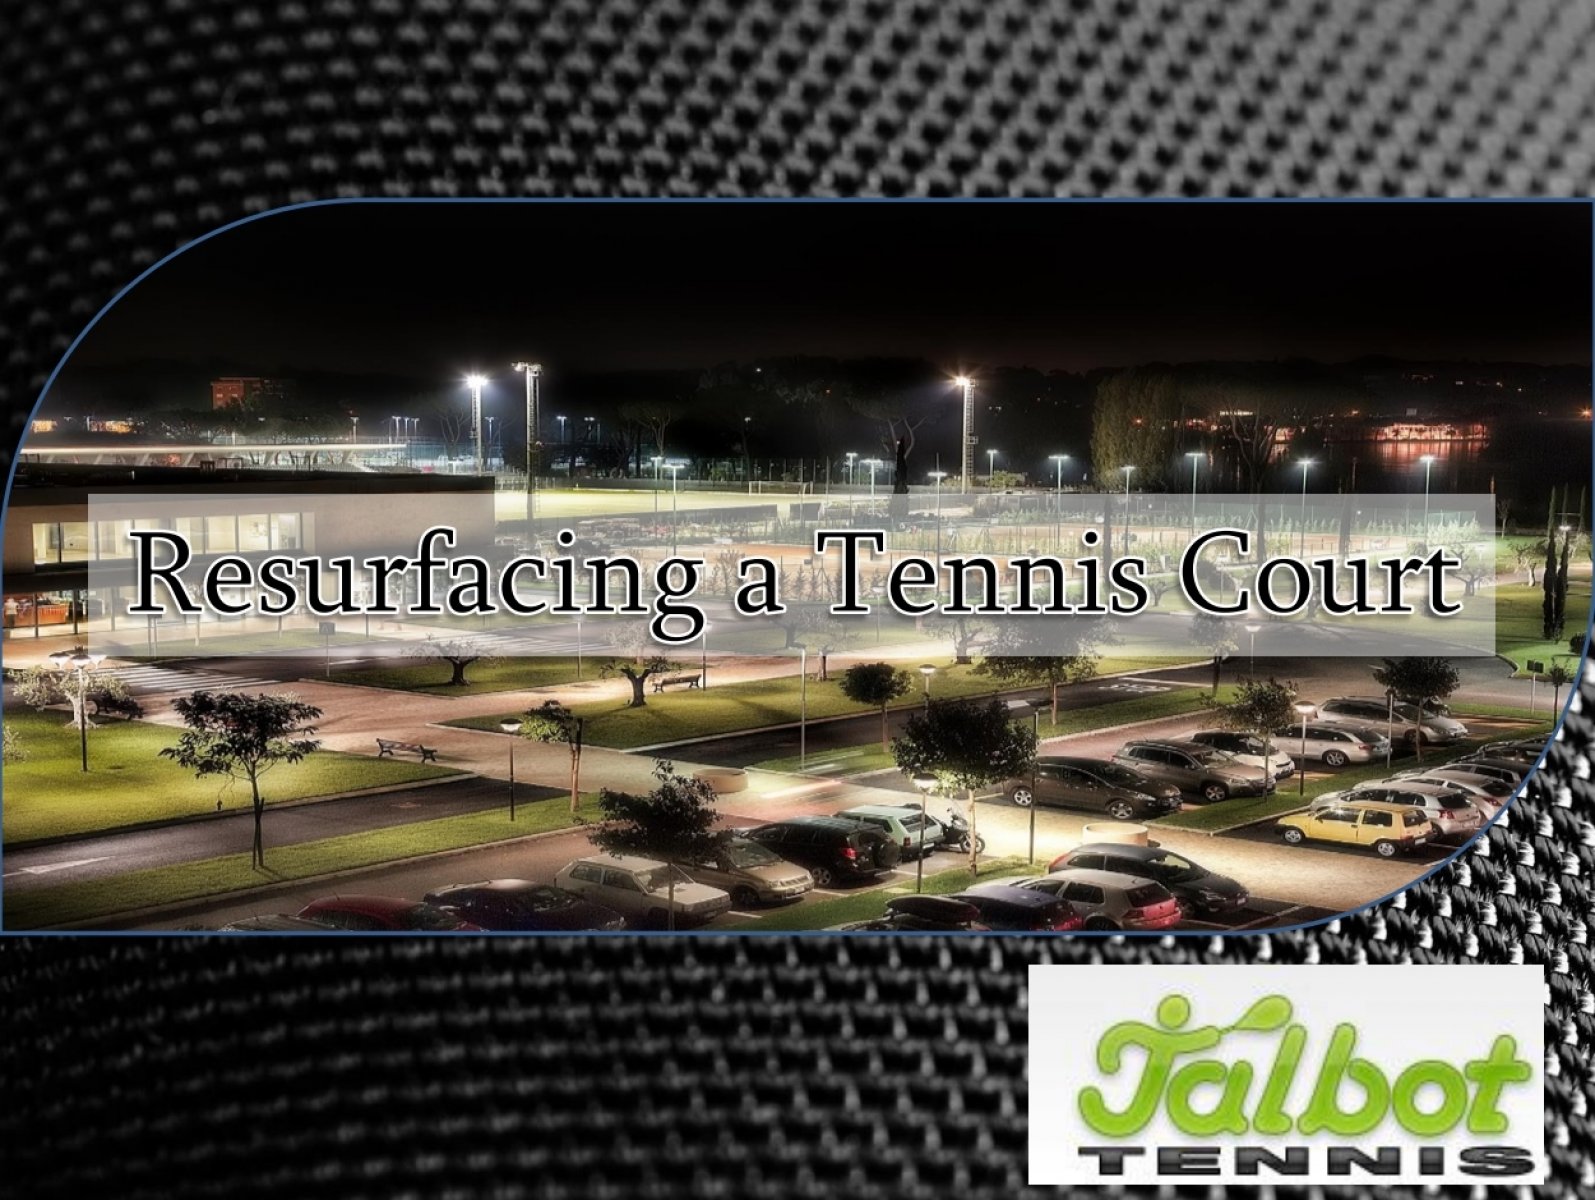 Professional Tennis Court Resurfacing Services by Talbot Tennis